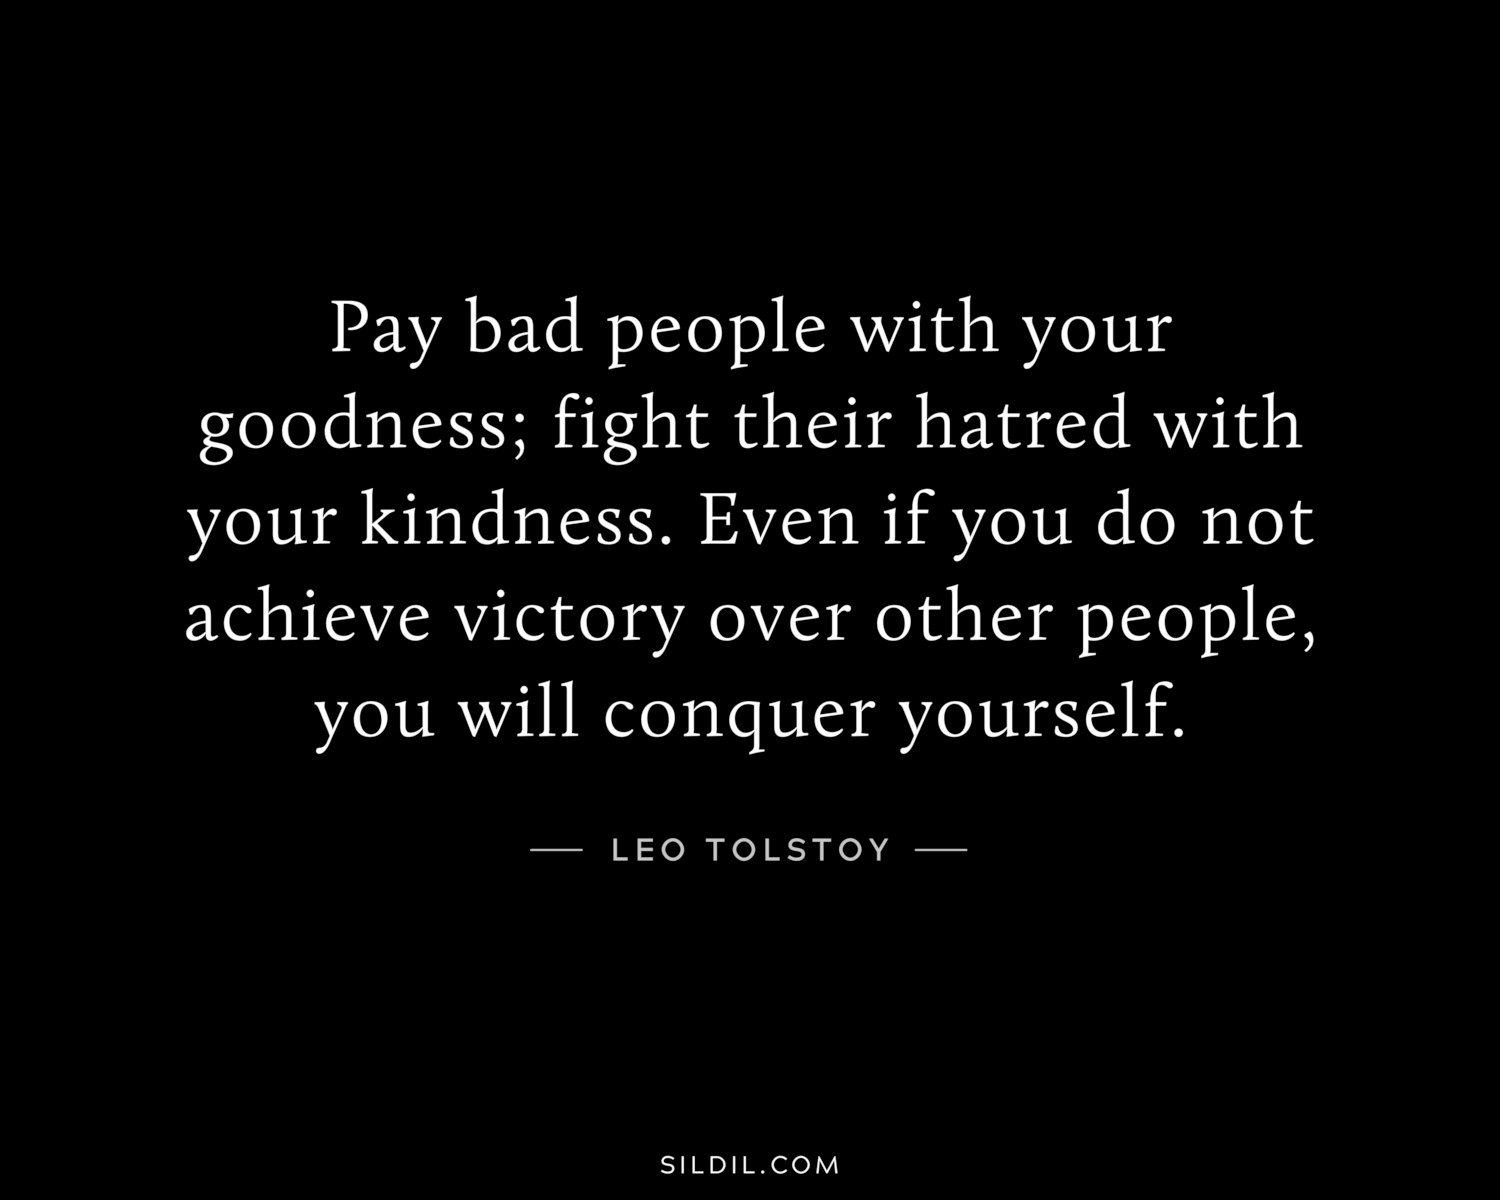 Pay bad people with your goodness; fight their hatred with your kindness. Even if you do not achieve victory over other people, you will conquer yourself.